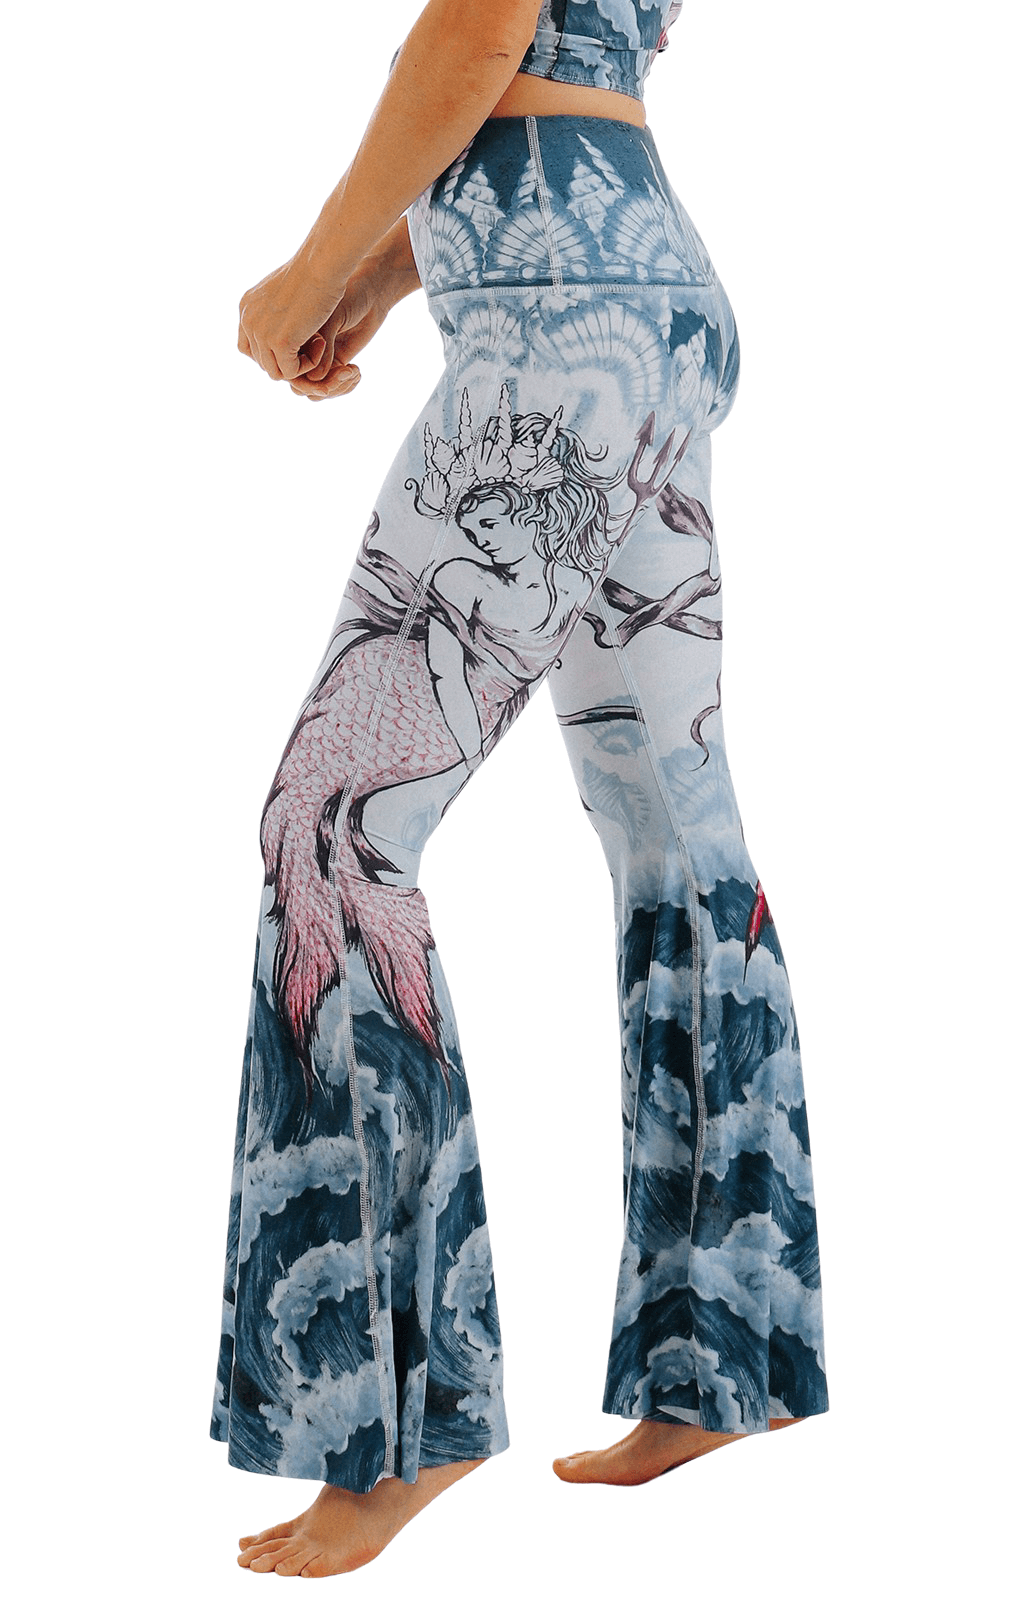 Buy D'Chica High Waist Printed Flared Leggings with Pockets for Womens,  Stretchable Ankle Length Palazzo Trouser Pants, Bell Bottom Trousers for  Women, Activewear Leggings for Yoga, Zumba & Cardio at Amazon.in